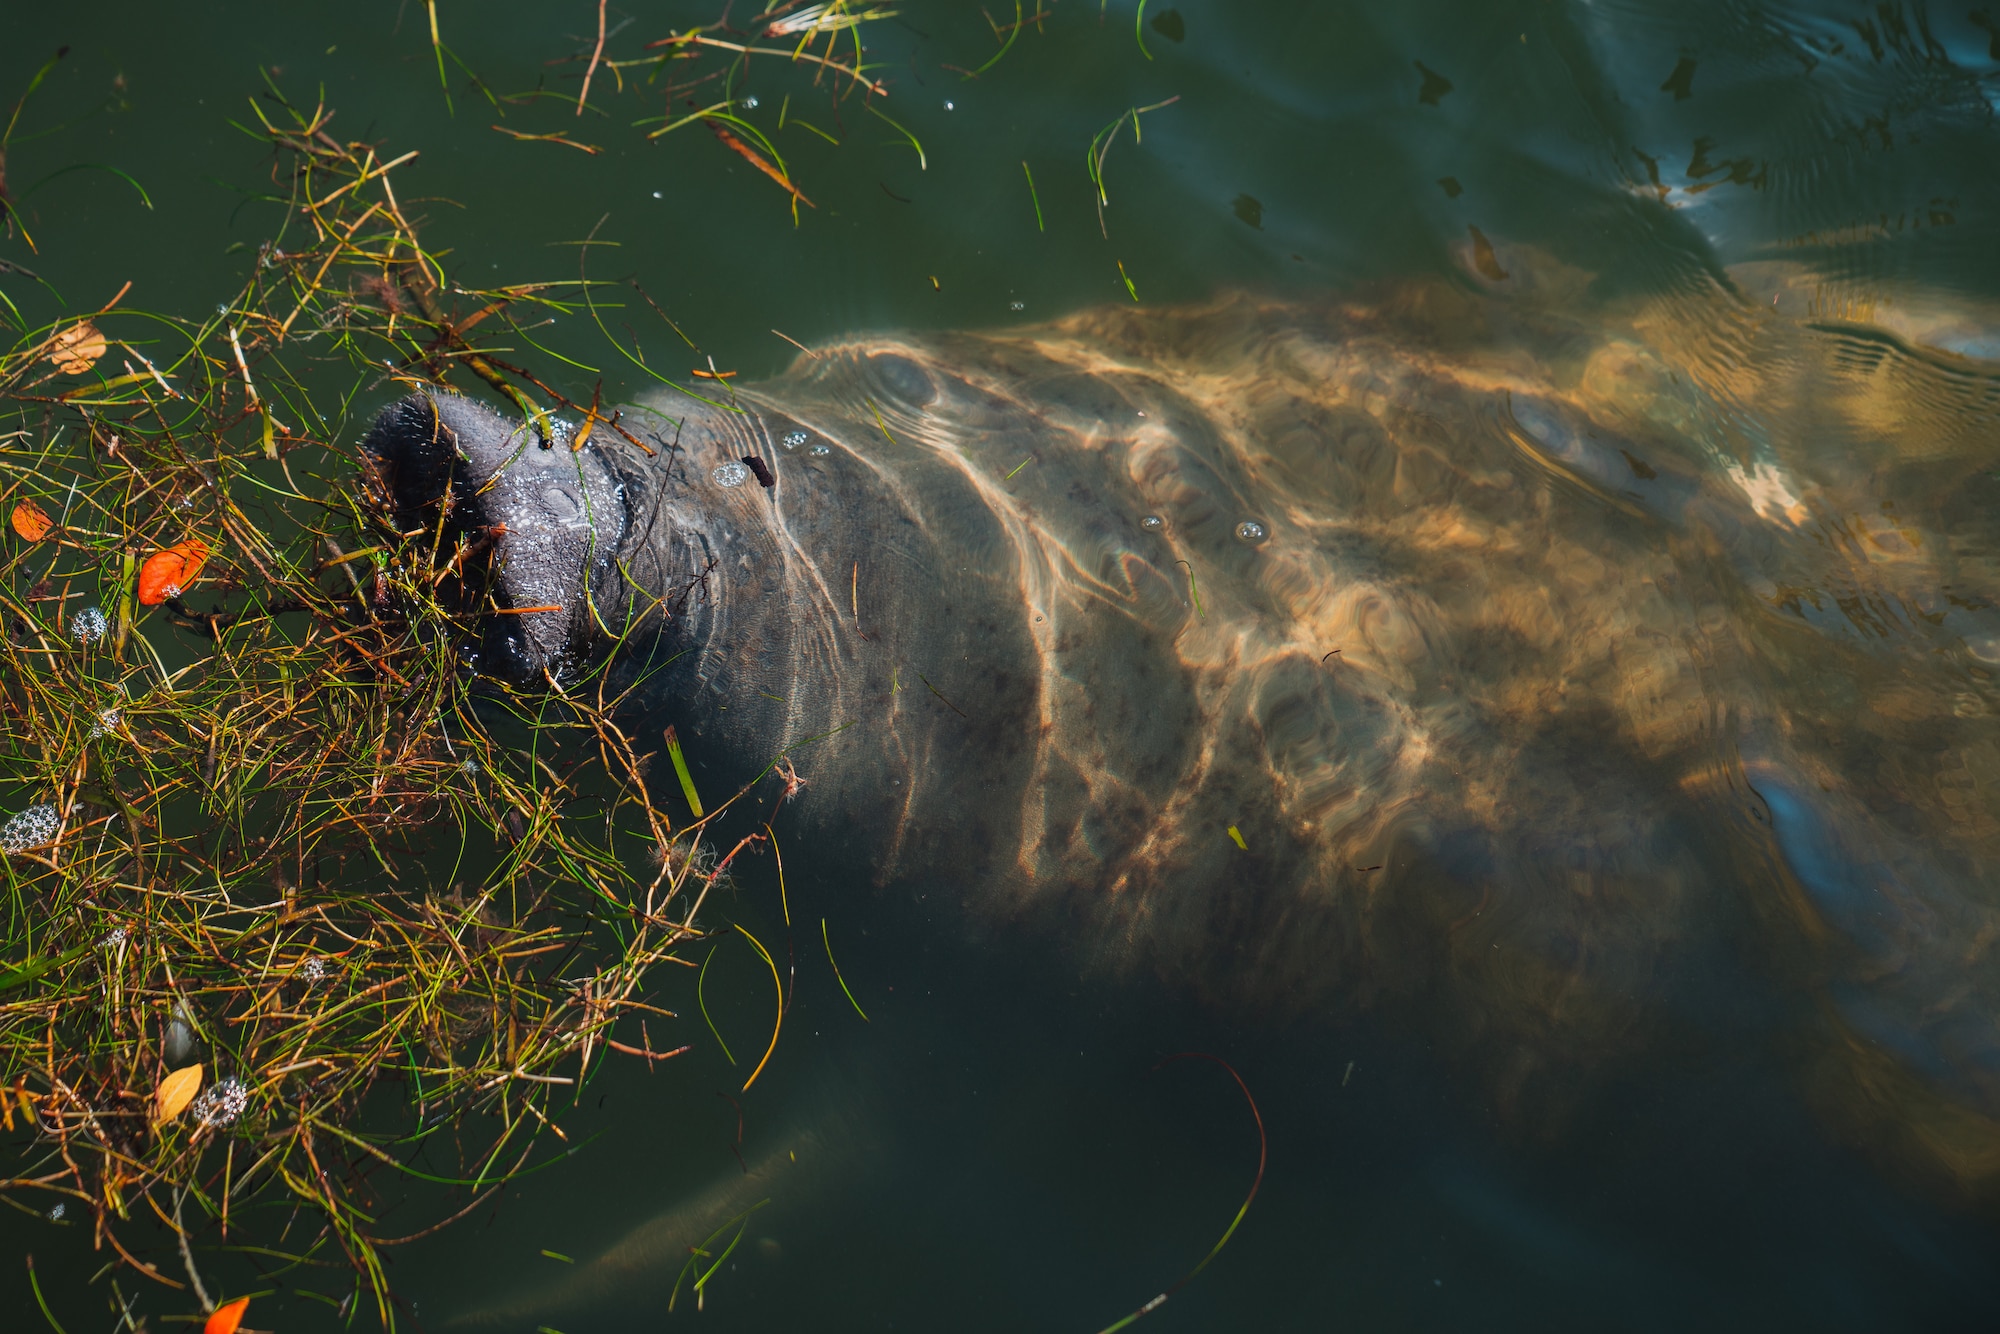 Florida manatees are managed jointly by both the U.S. Fish and Wildlife Service and the Florida Fish and Wildlife Conservation Commission.